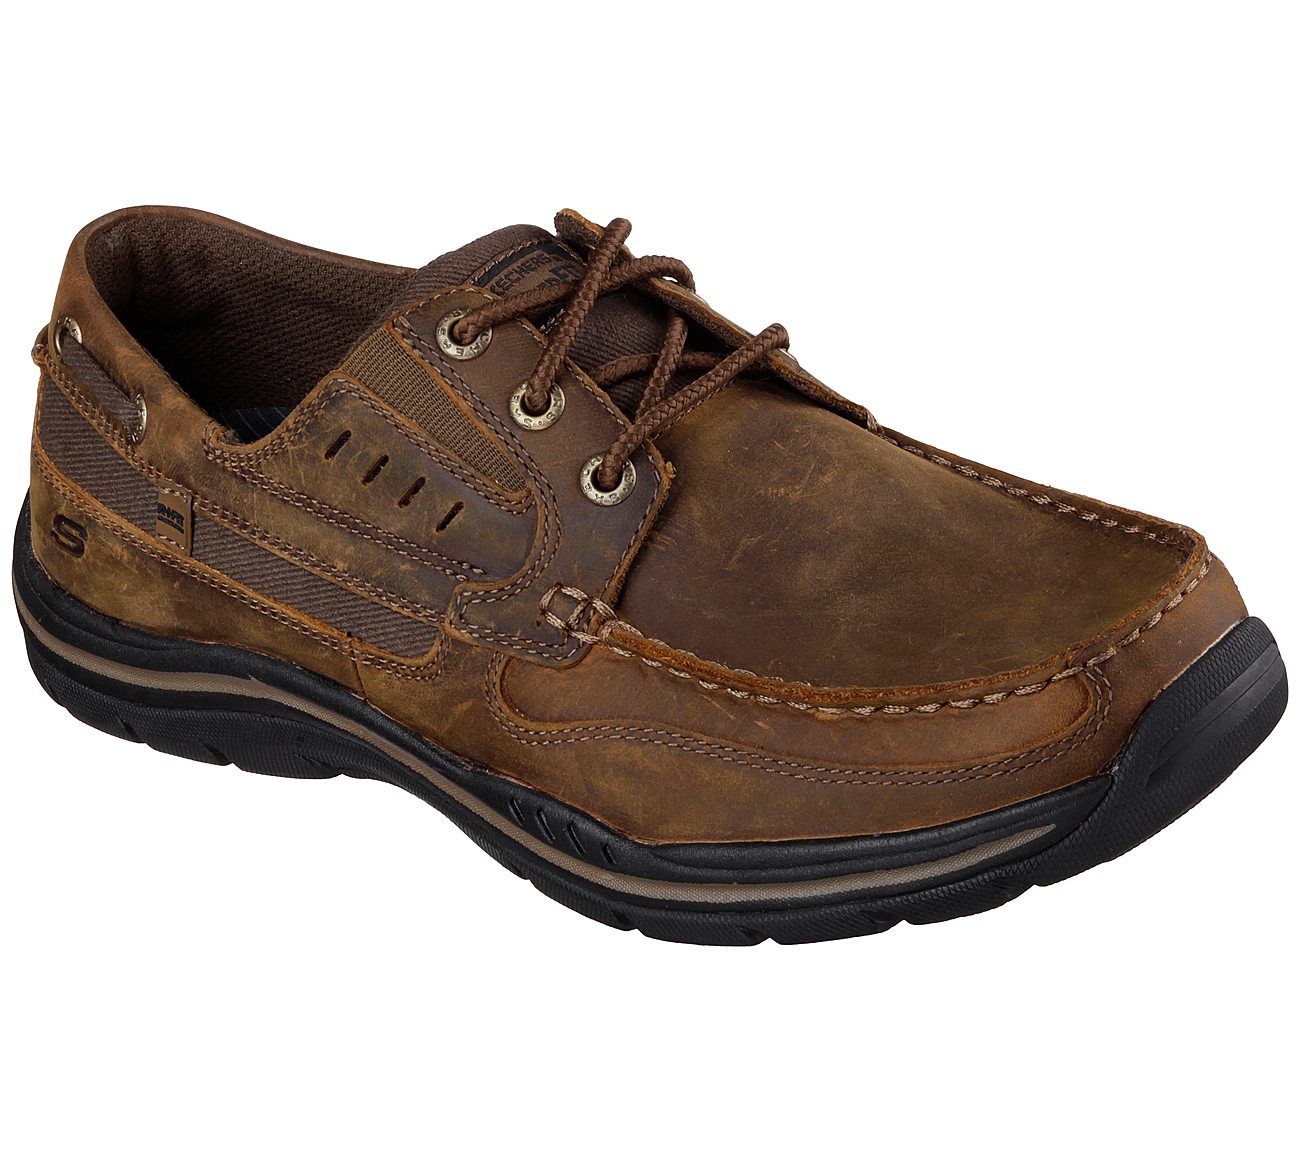 skechers usa men's expected gembel relax fit oxford